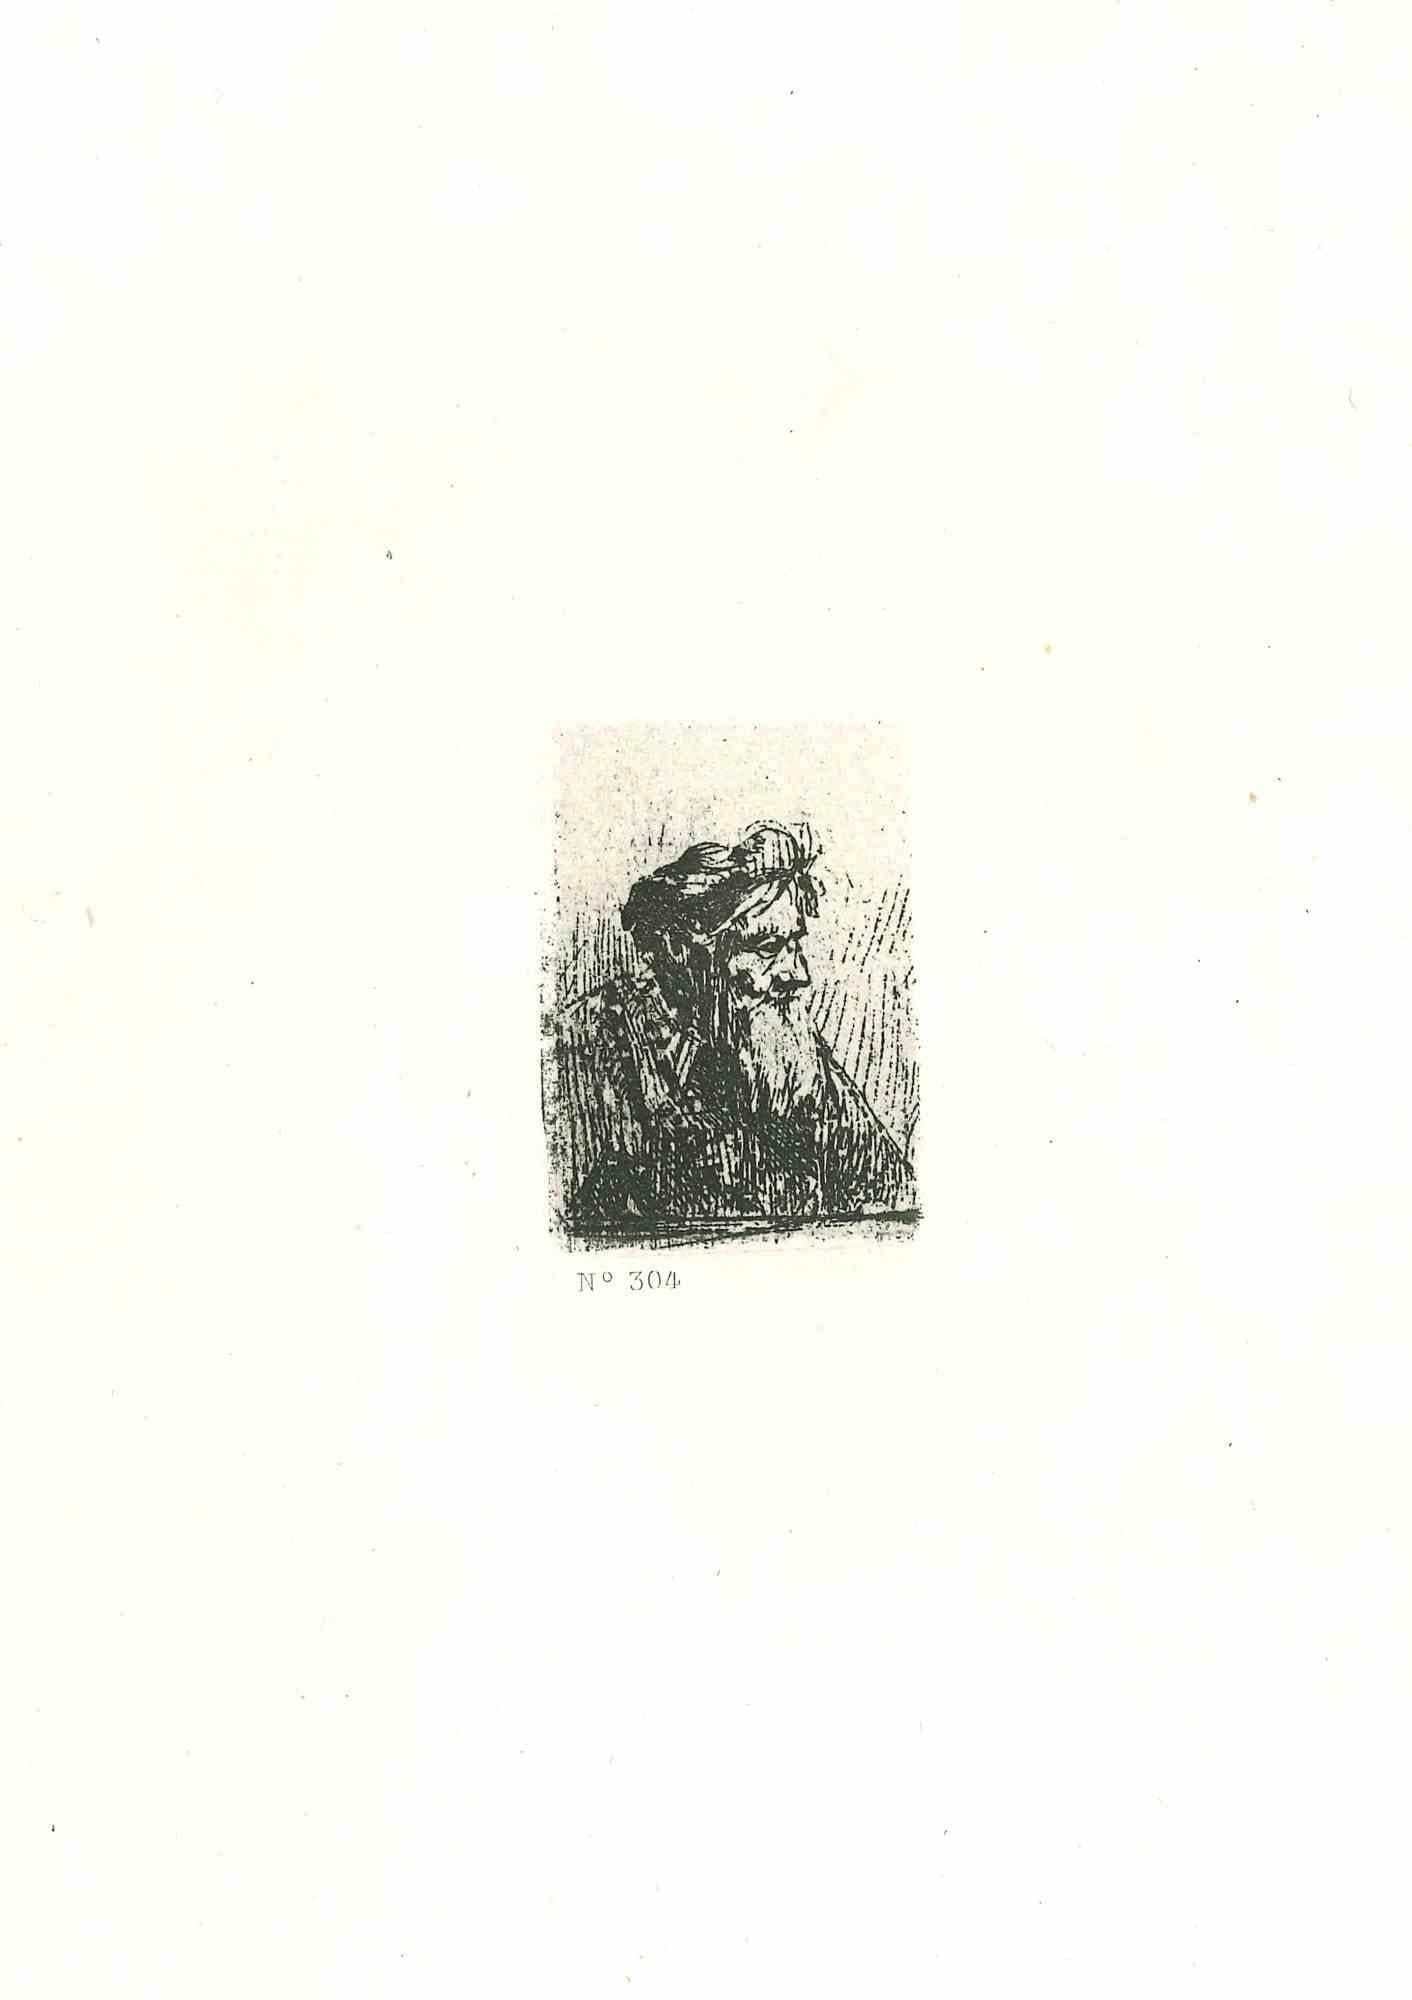 Charles Amand Durand Figurative Print - Head of a Man with Turban - Engraving after Rembrandt - 19th Century